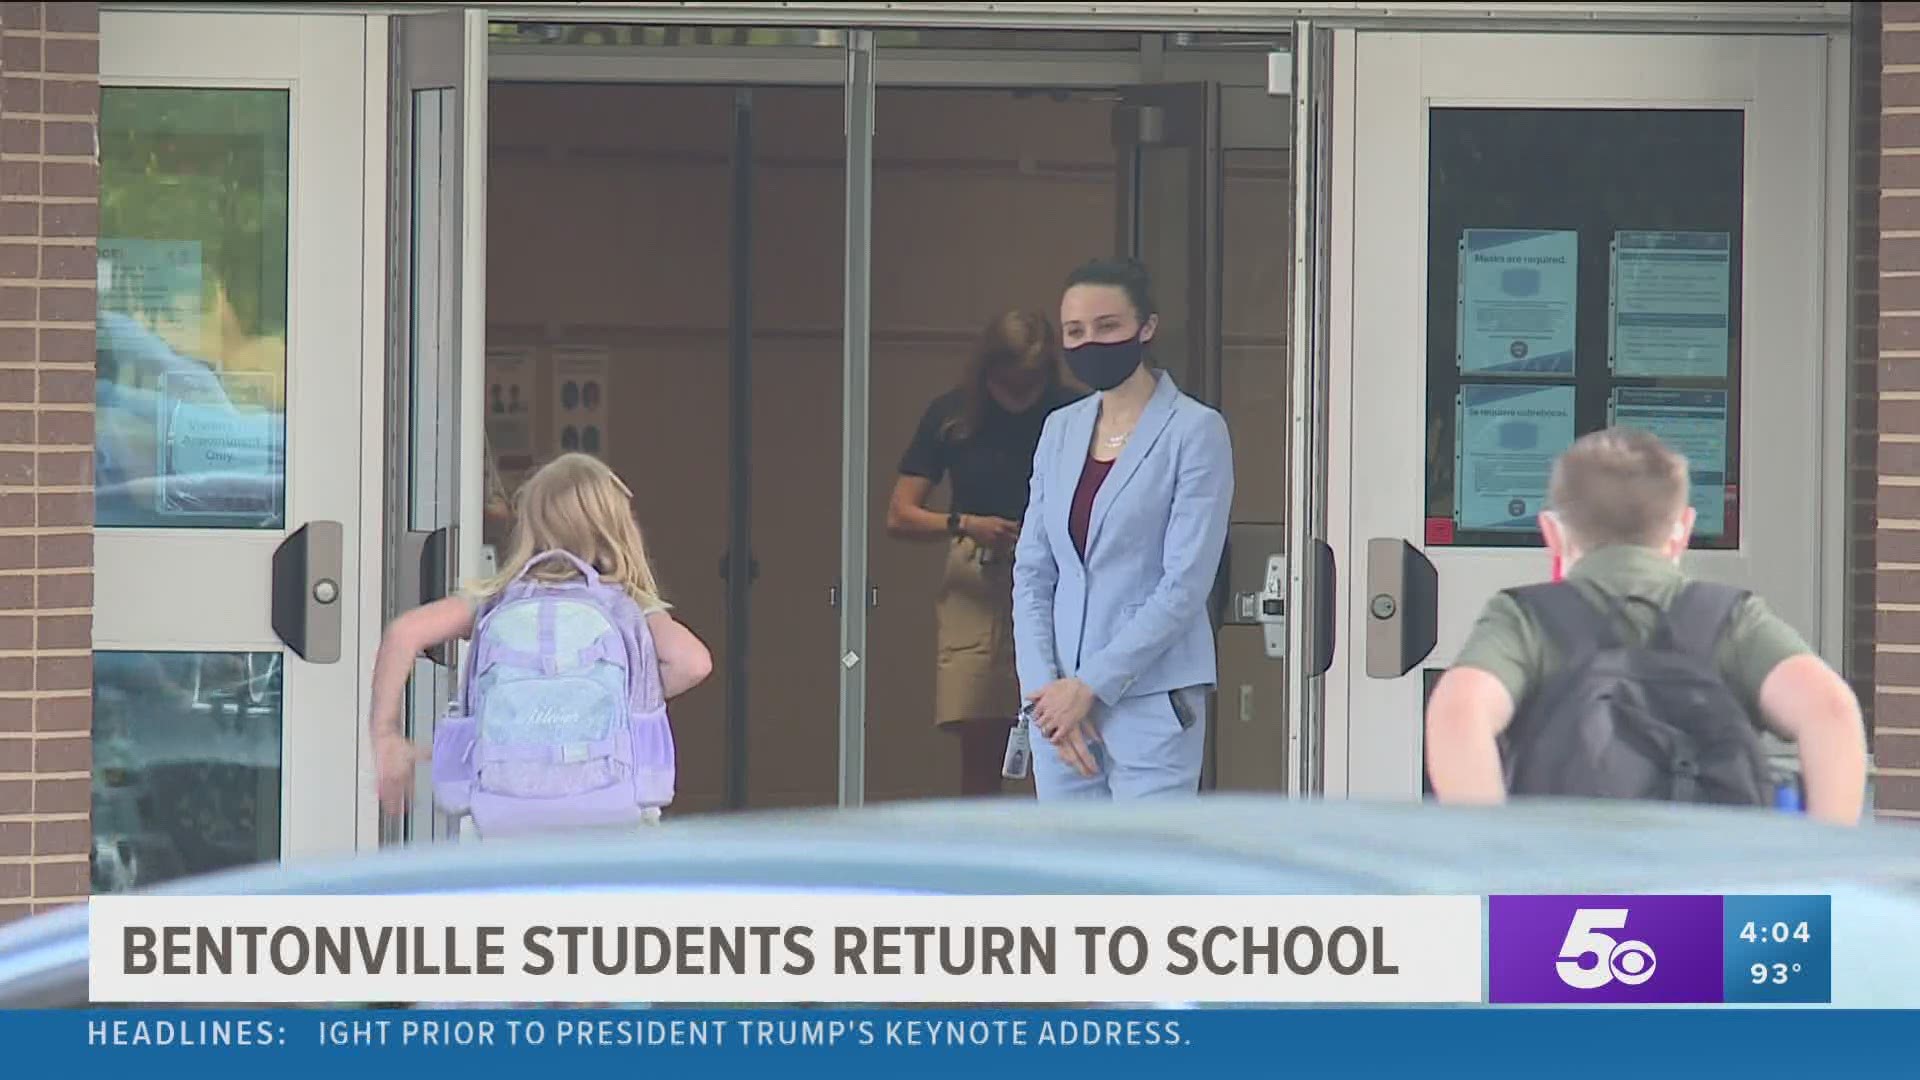 It's a first for parents, teachers and students as most Arkansas schools started classes Monday amid the coronavirus pandemic. https://bit.ly/2QmhXcK